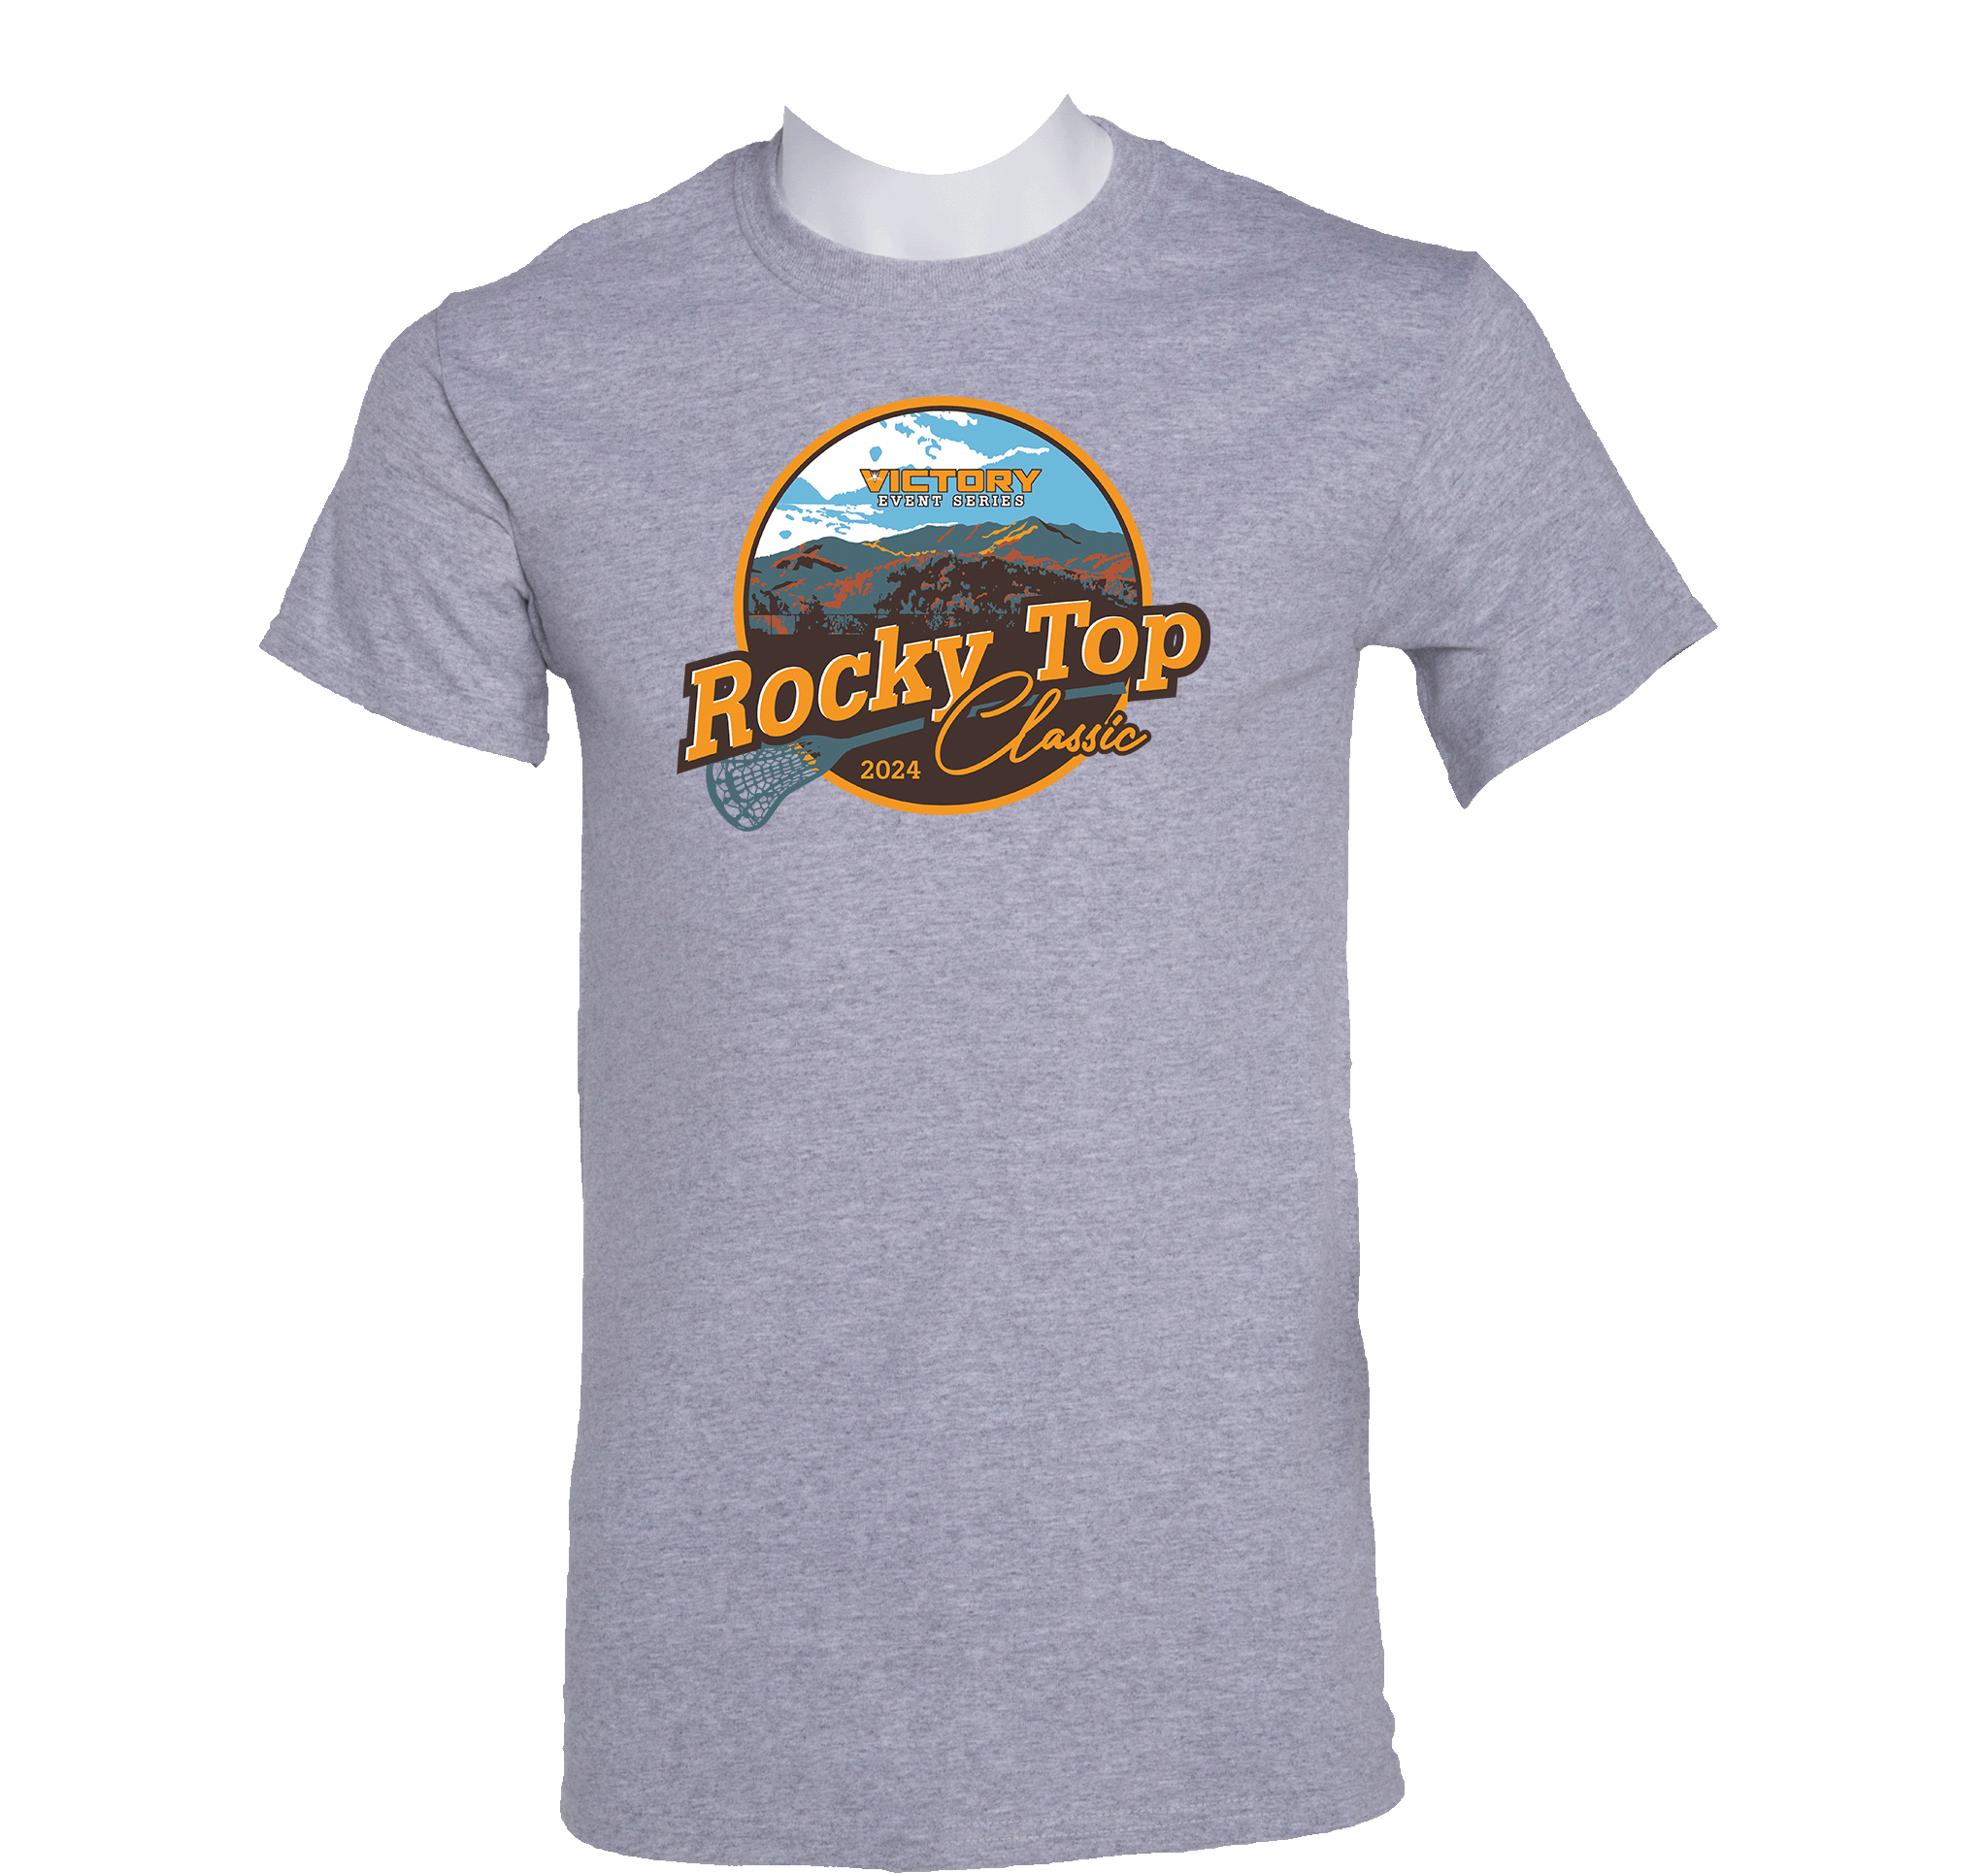 Short Sleeves - 2024 Rocky Top Classic